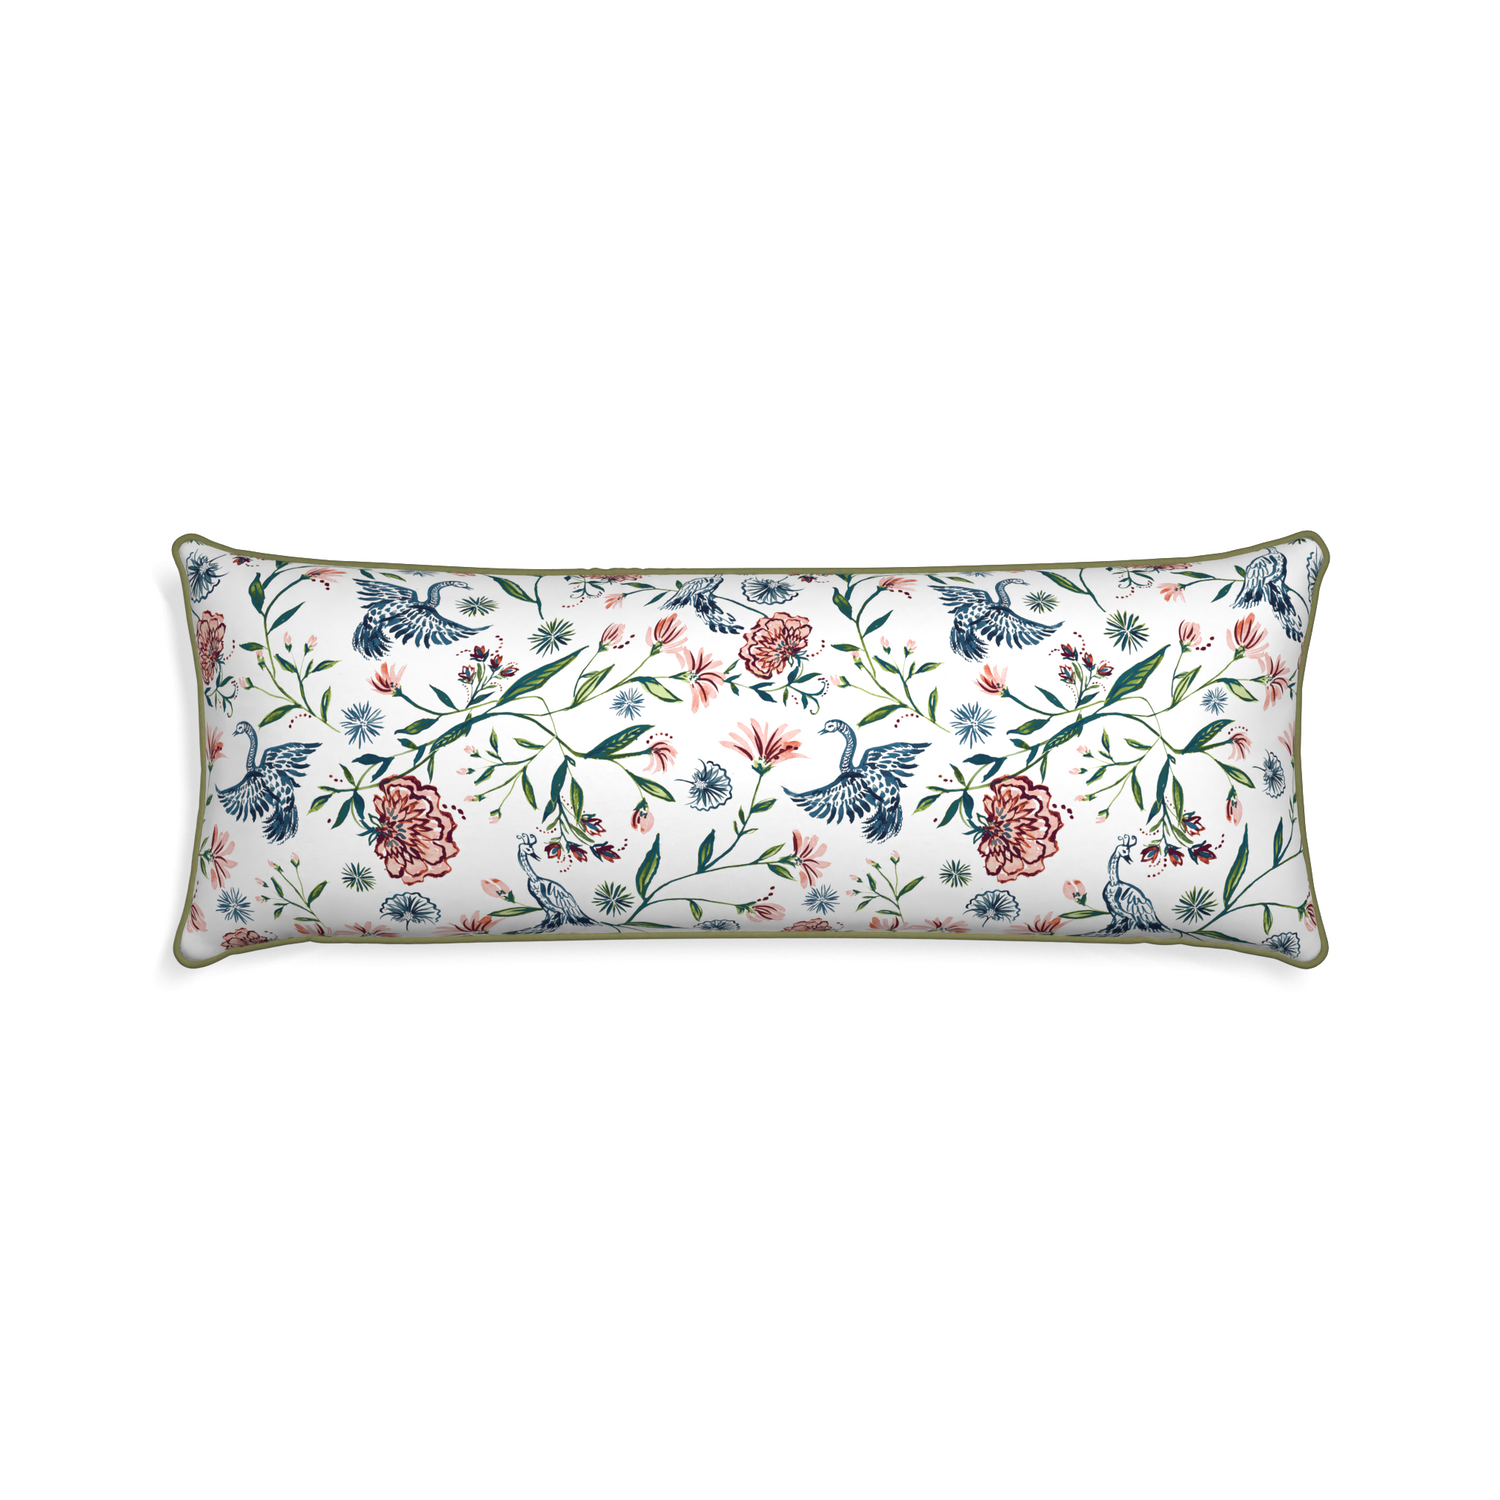 Xl-lumbar daphne cream custom pillow with moss piping on white background